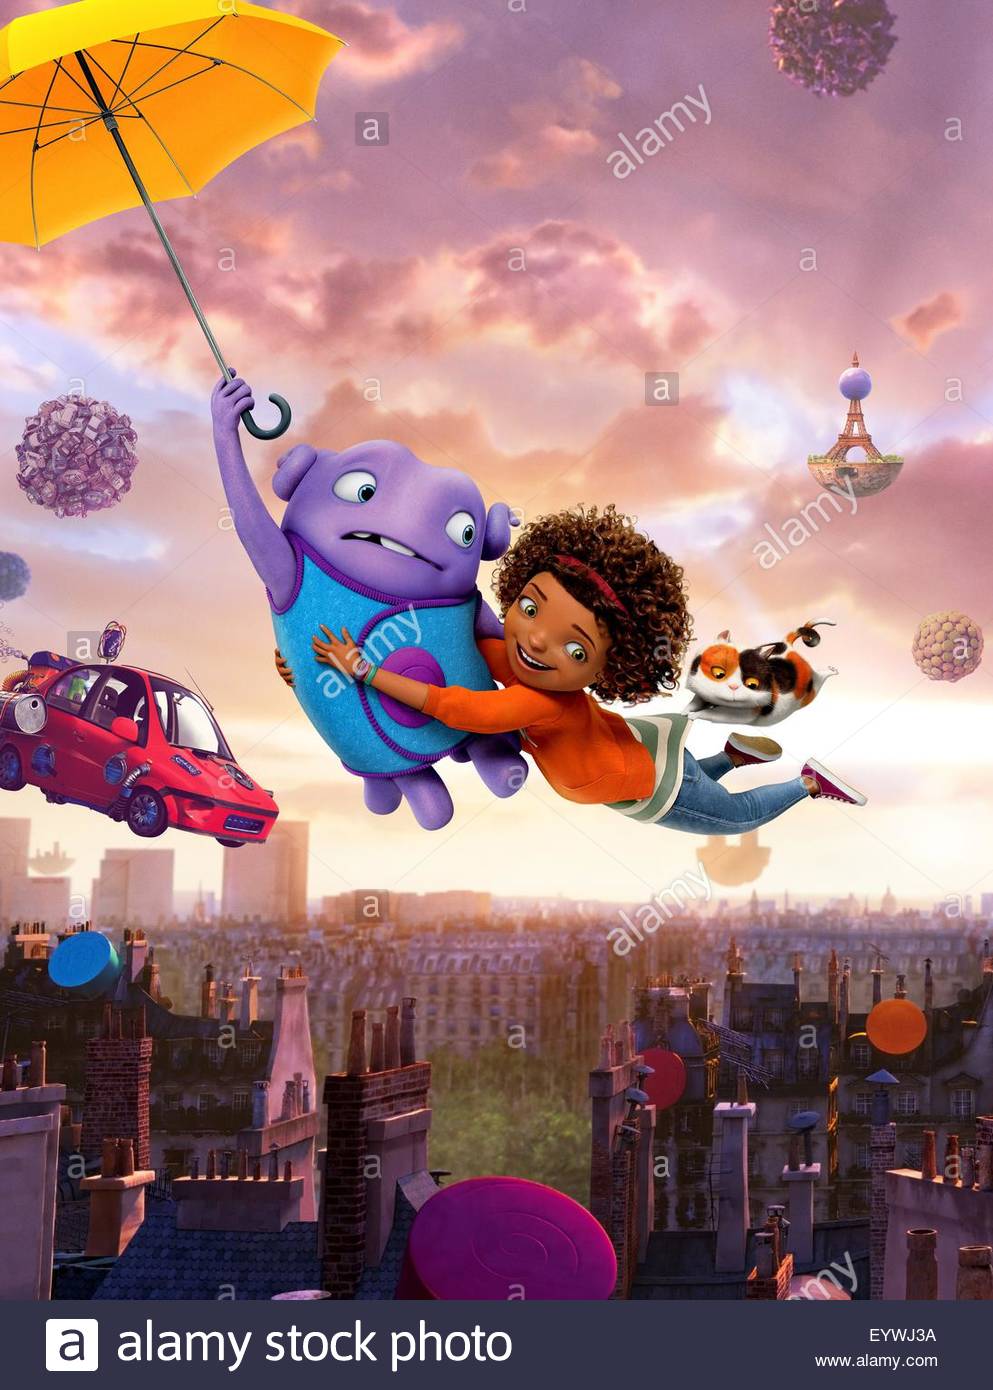 home animated movie download